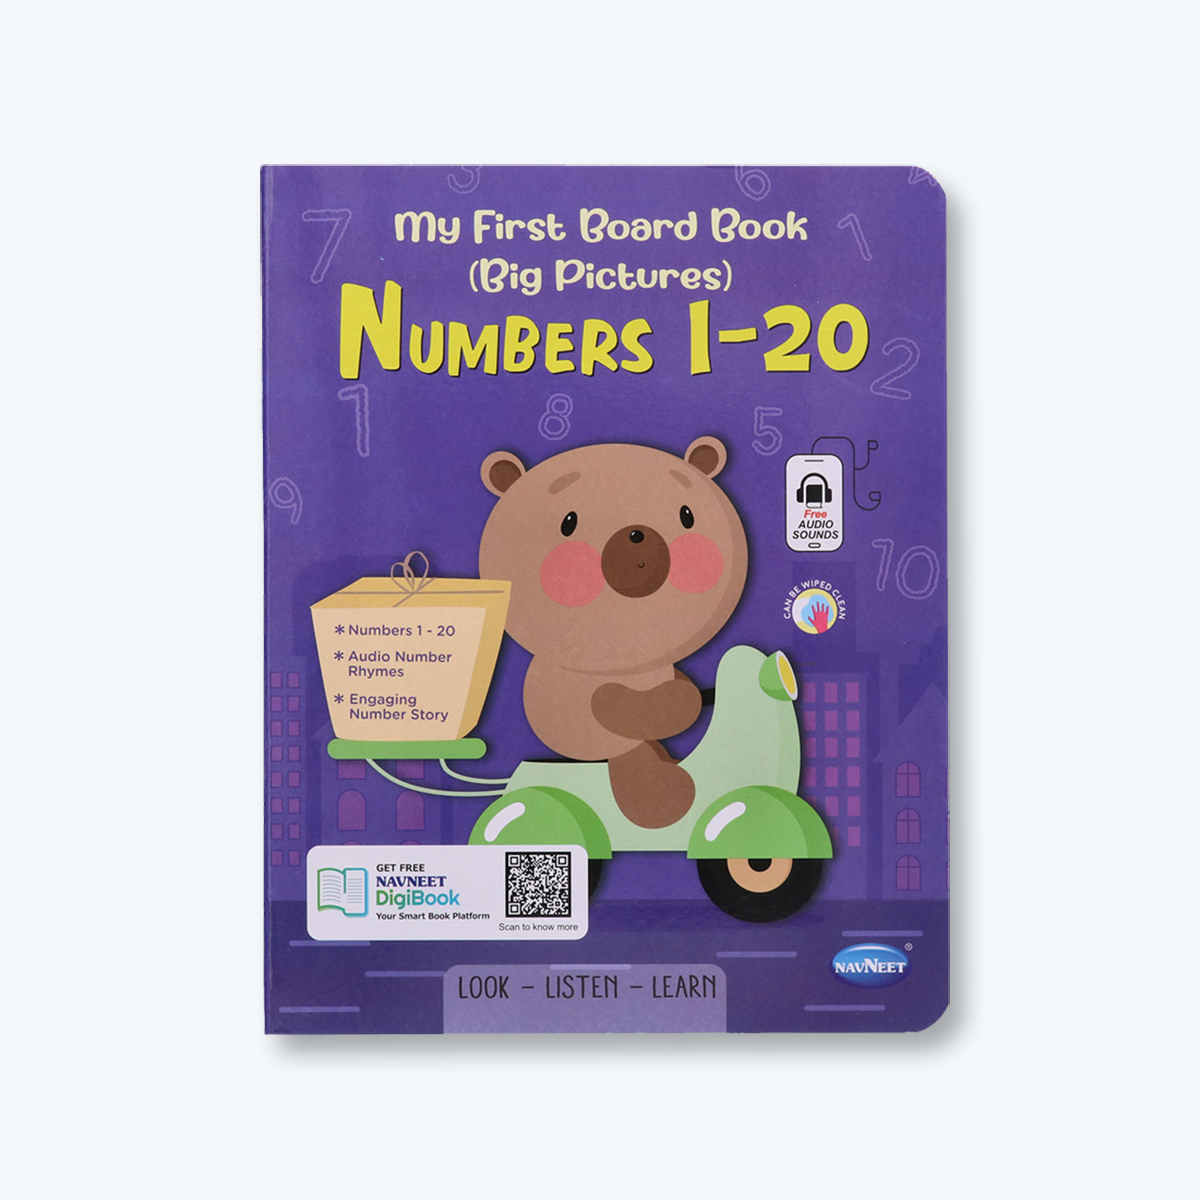 Navneet My First Board Book (Single Picture) Numbers 1 to 20- Bestselling Picture board books for Babies & Toddlers: Large Picture Board Book with Audio Number Sounds and Counting Songs